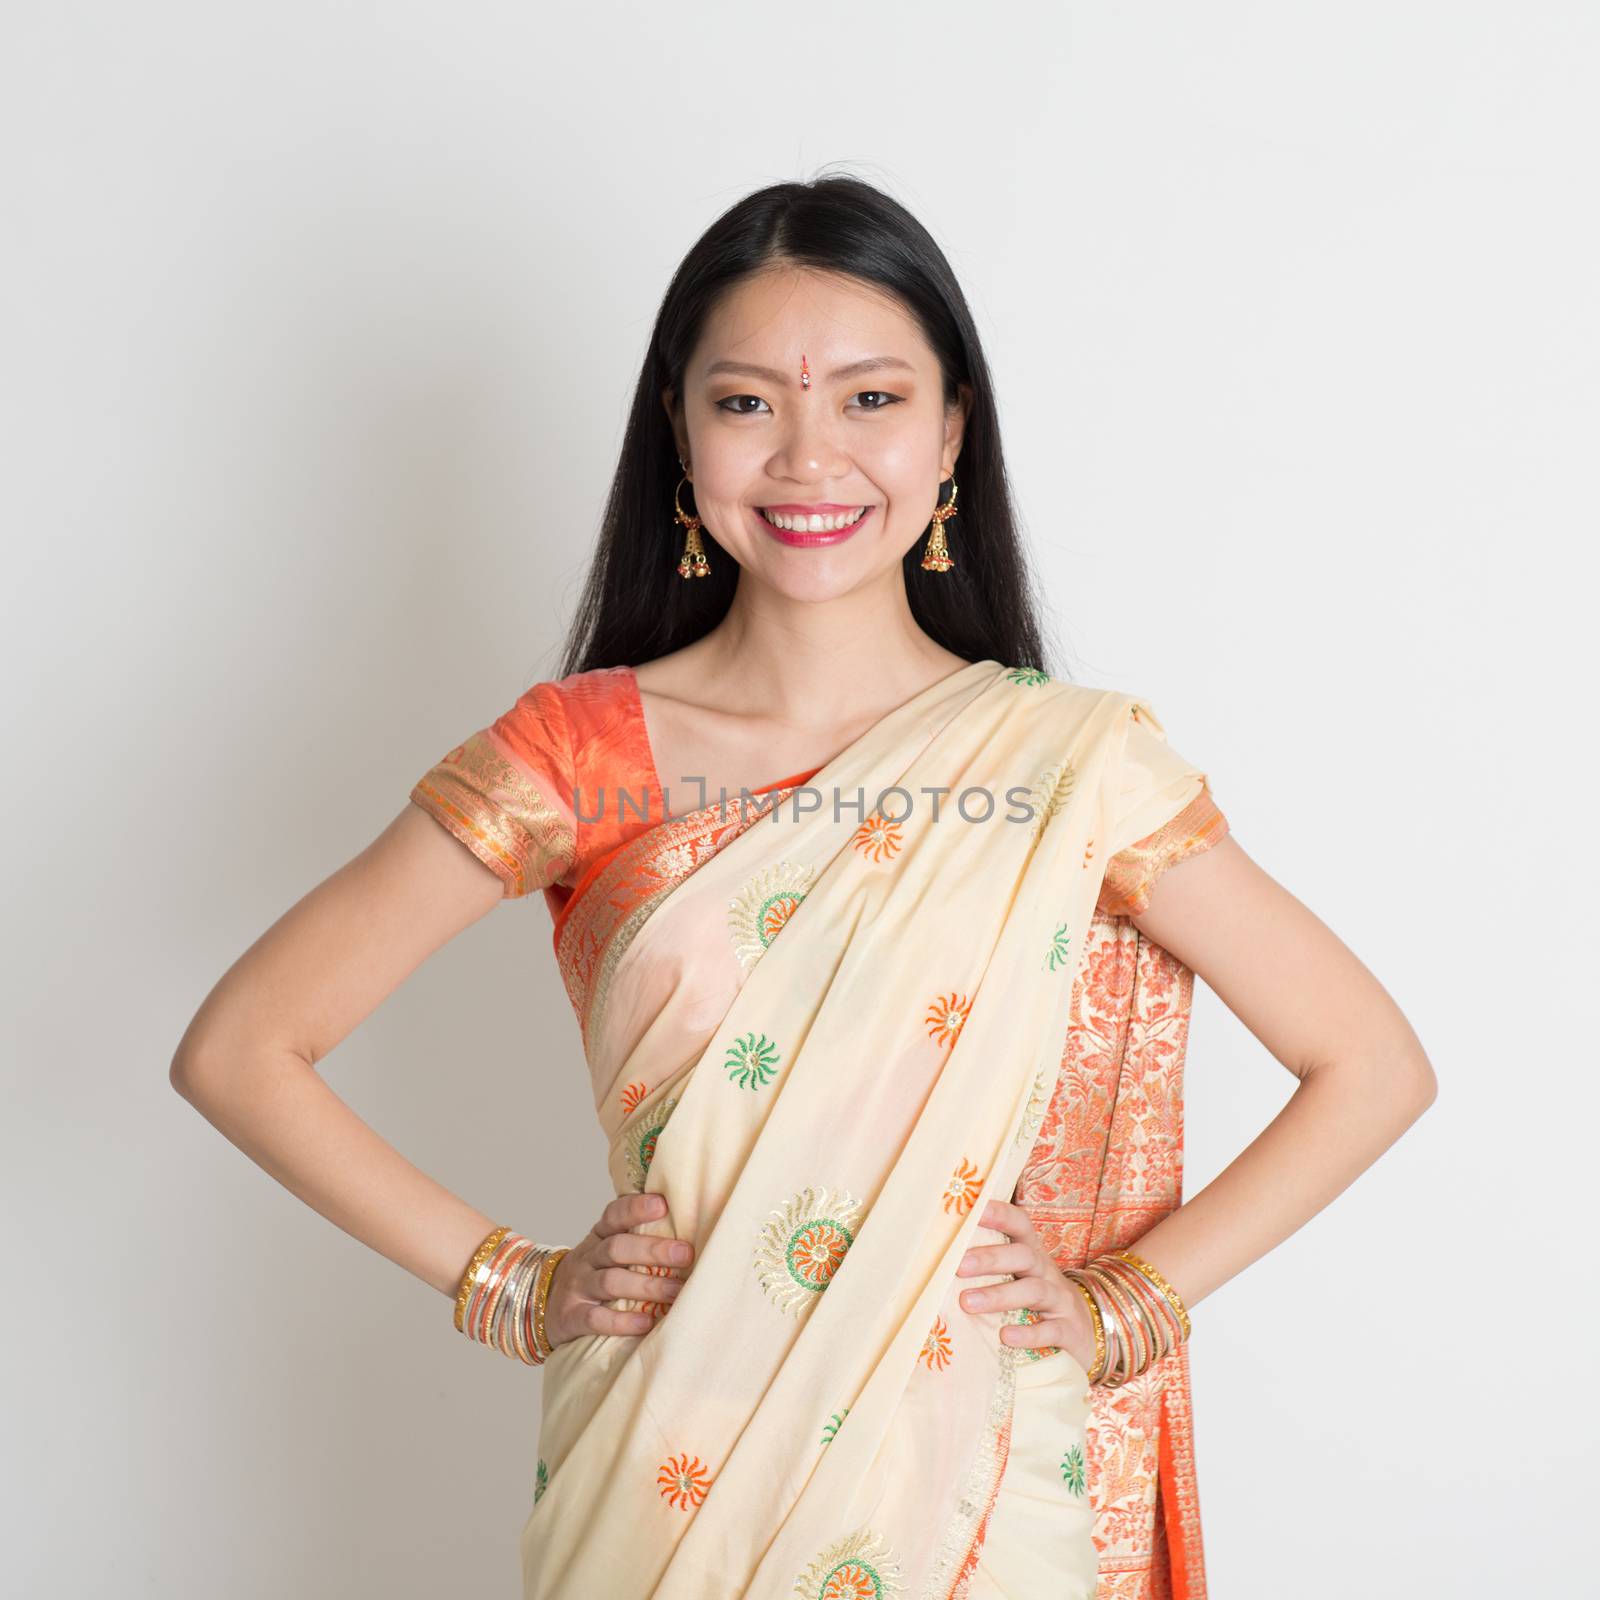 Confident Indian girl in sari smiling  by szefei